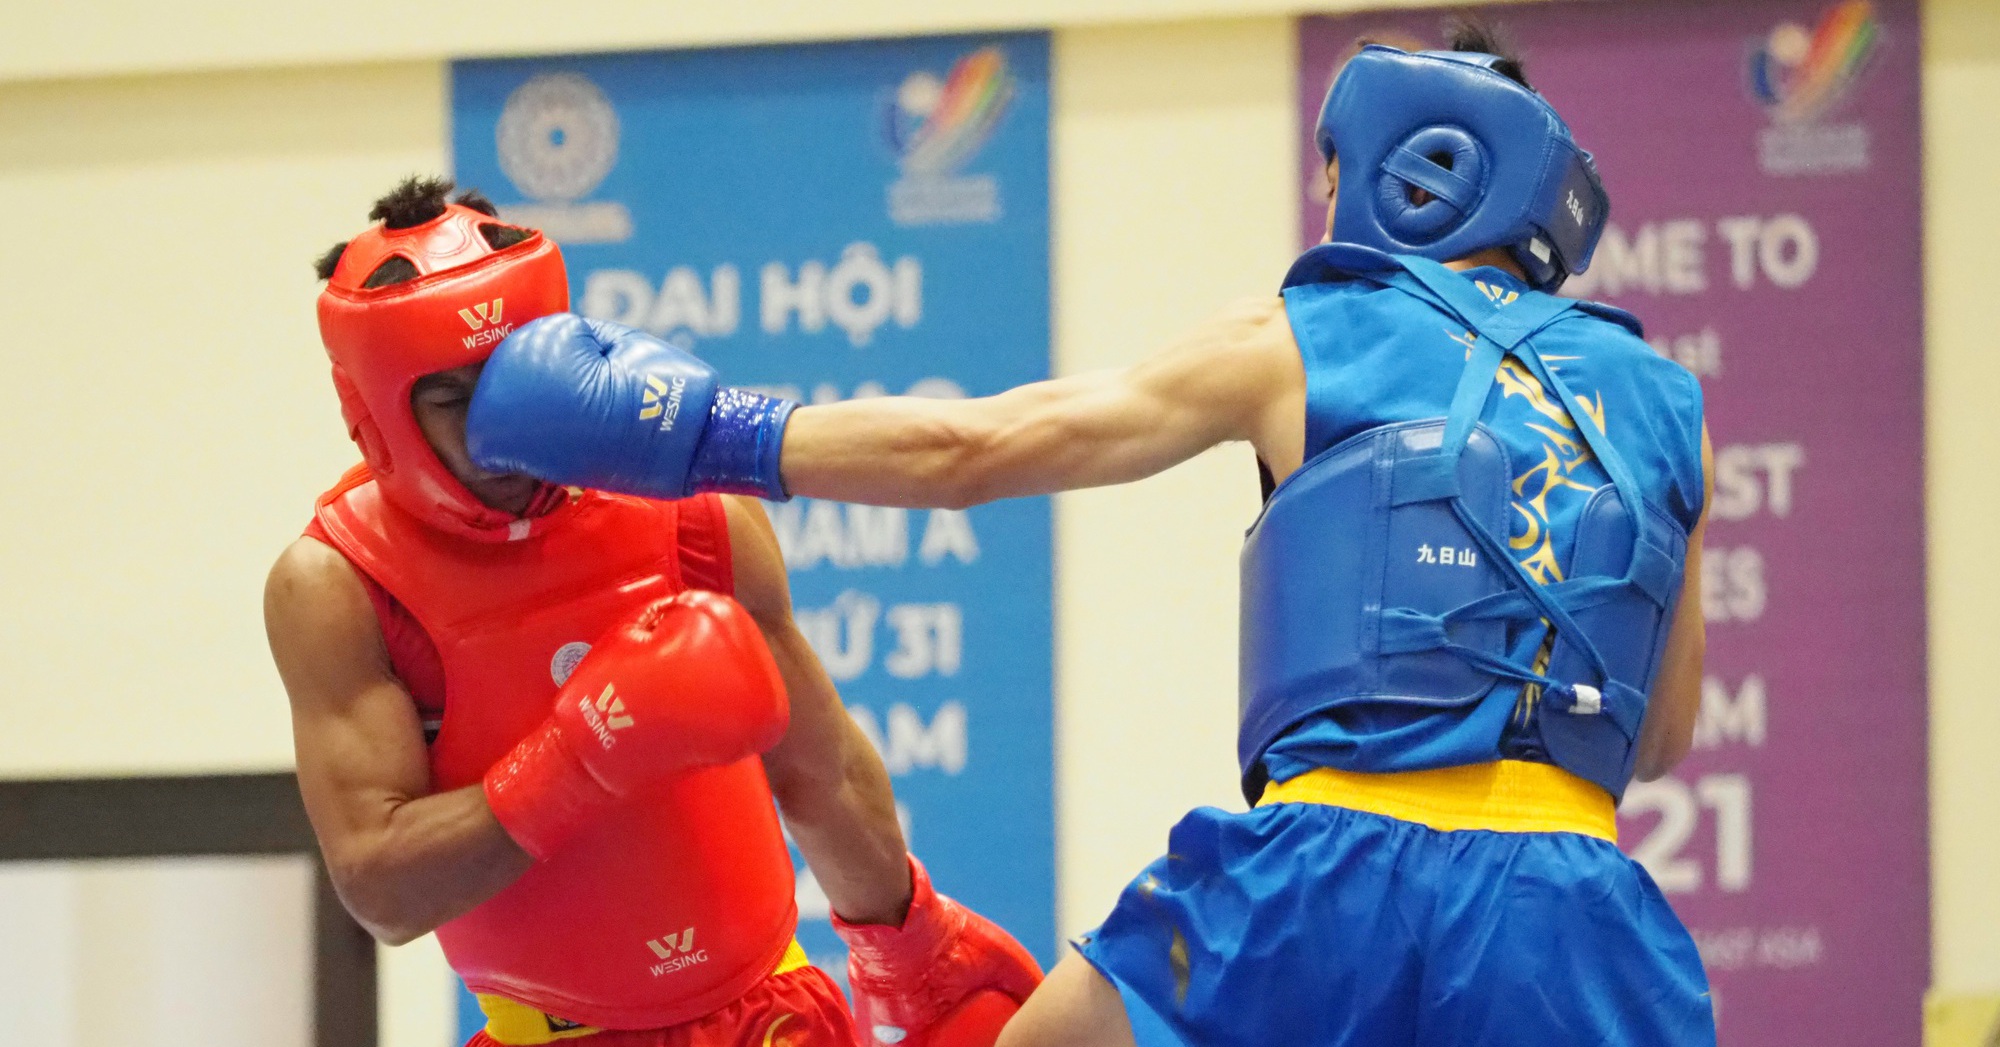 CLIP: The “explosive” moment of the day Vietnam Wushu set a gold record